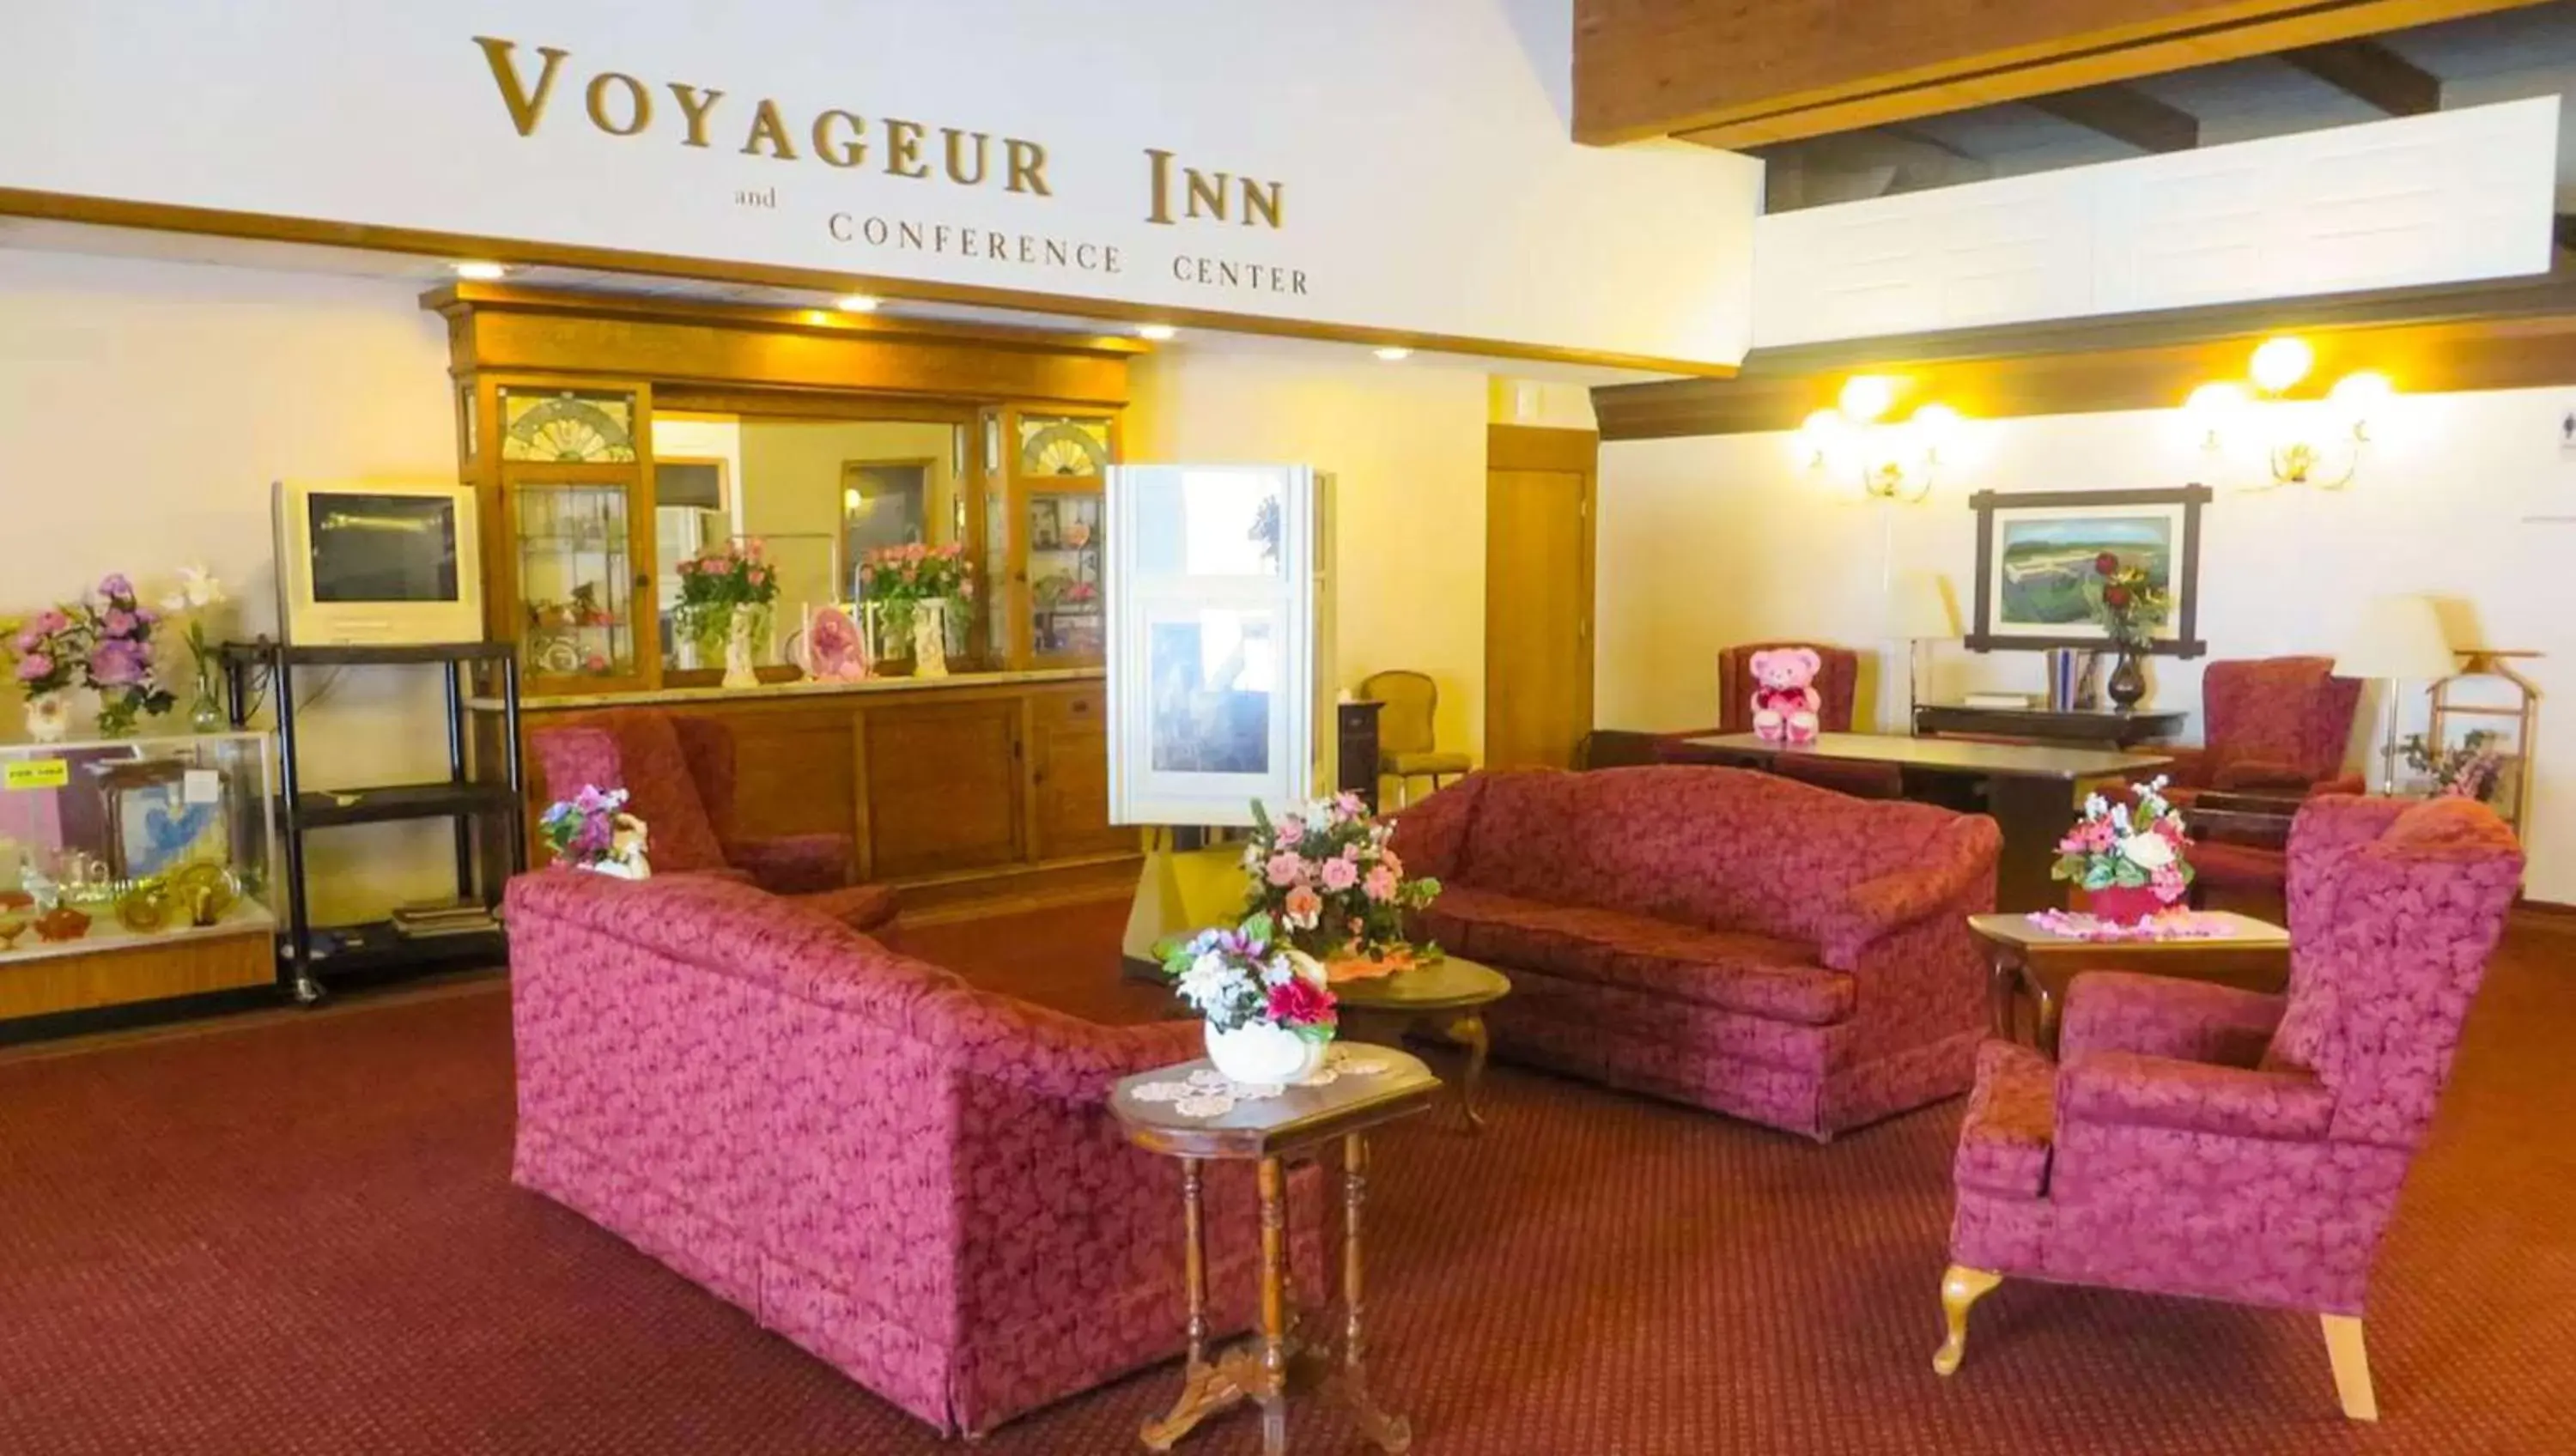 Lobby or reception in Voyageur Inn and Conference Center